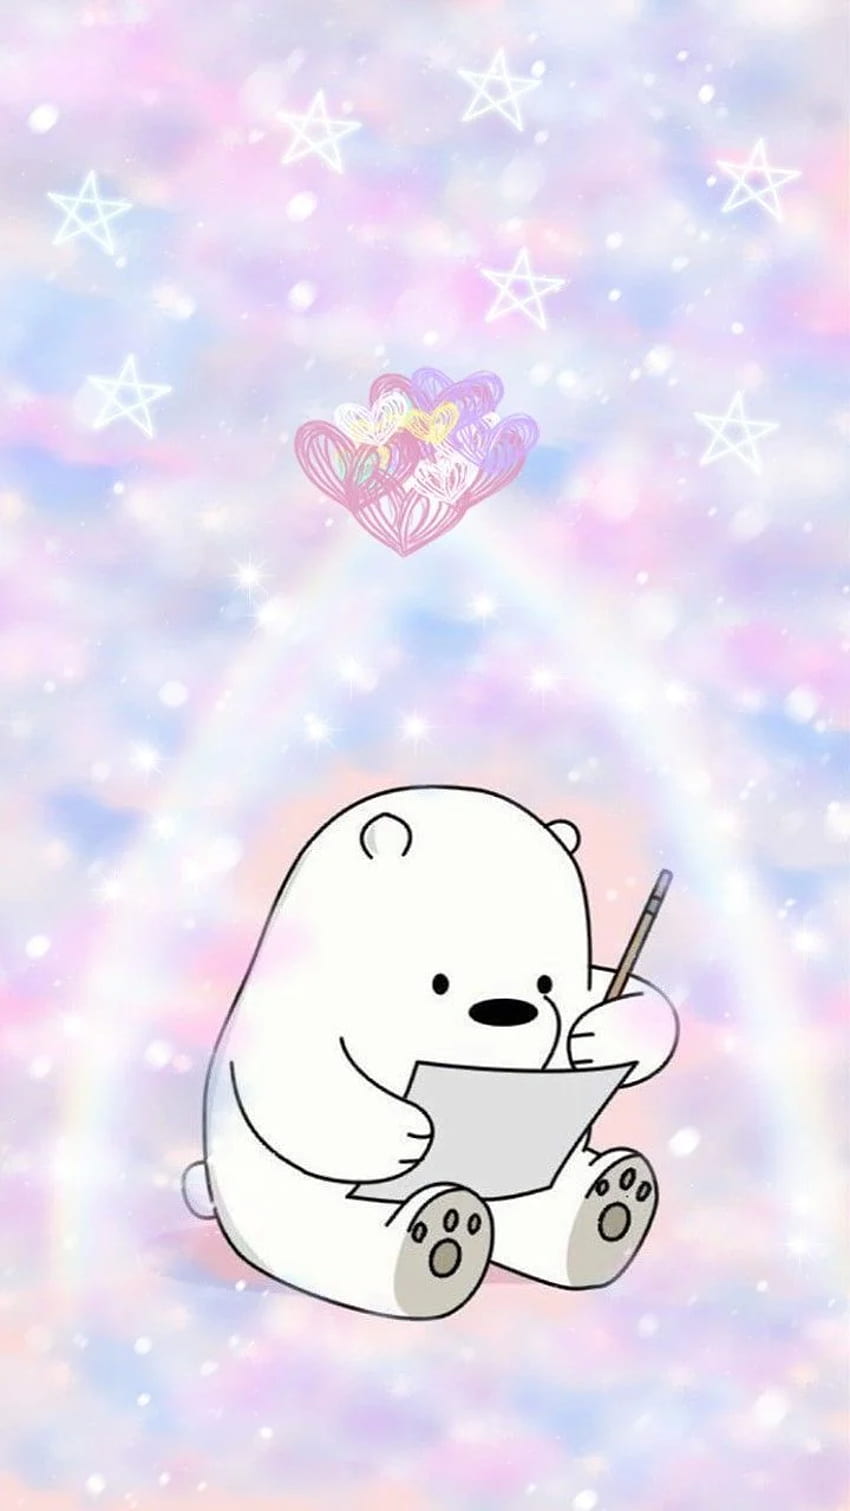 1290x2796px, 2K Free download | Ice bear pink aesthetic rainbow love ...